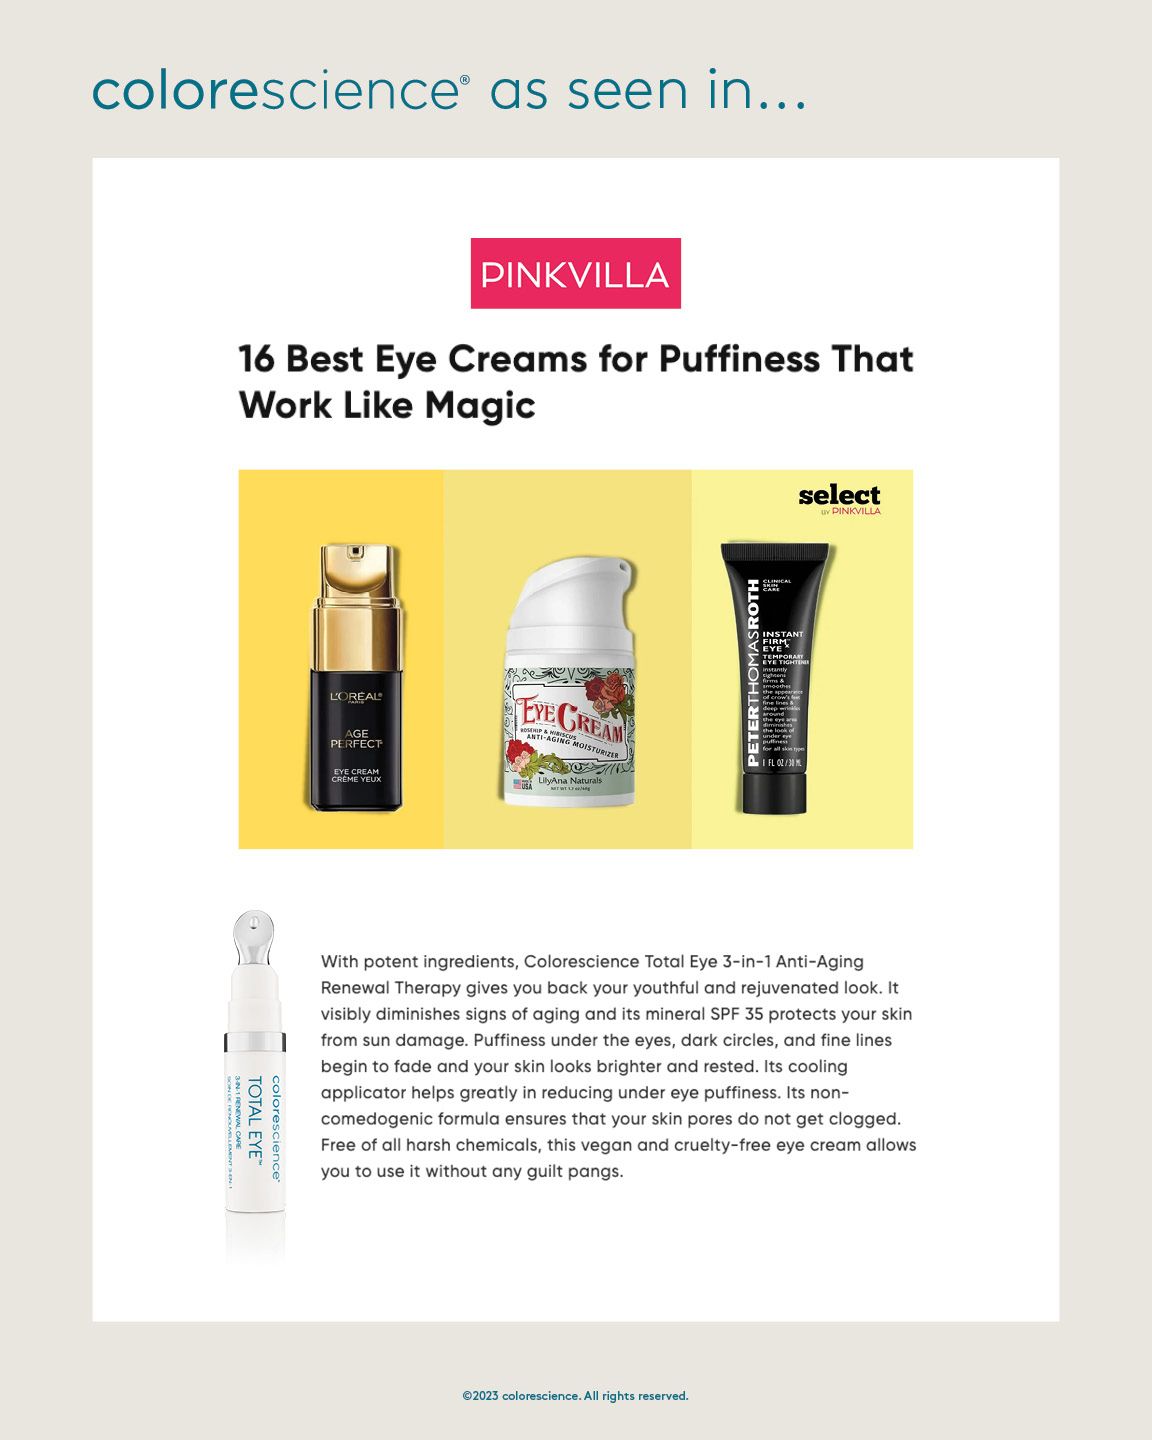 Best Eye Creams for Puffiness